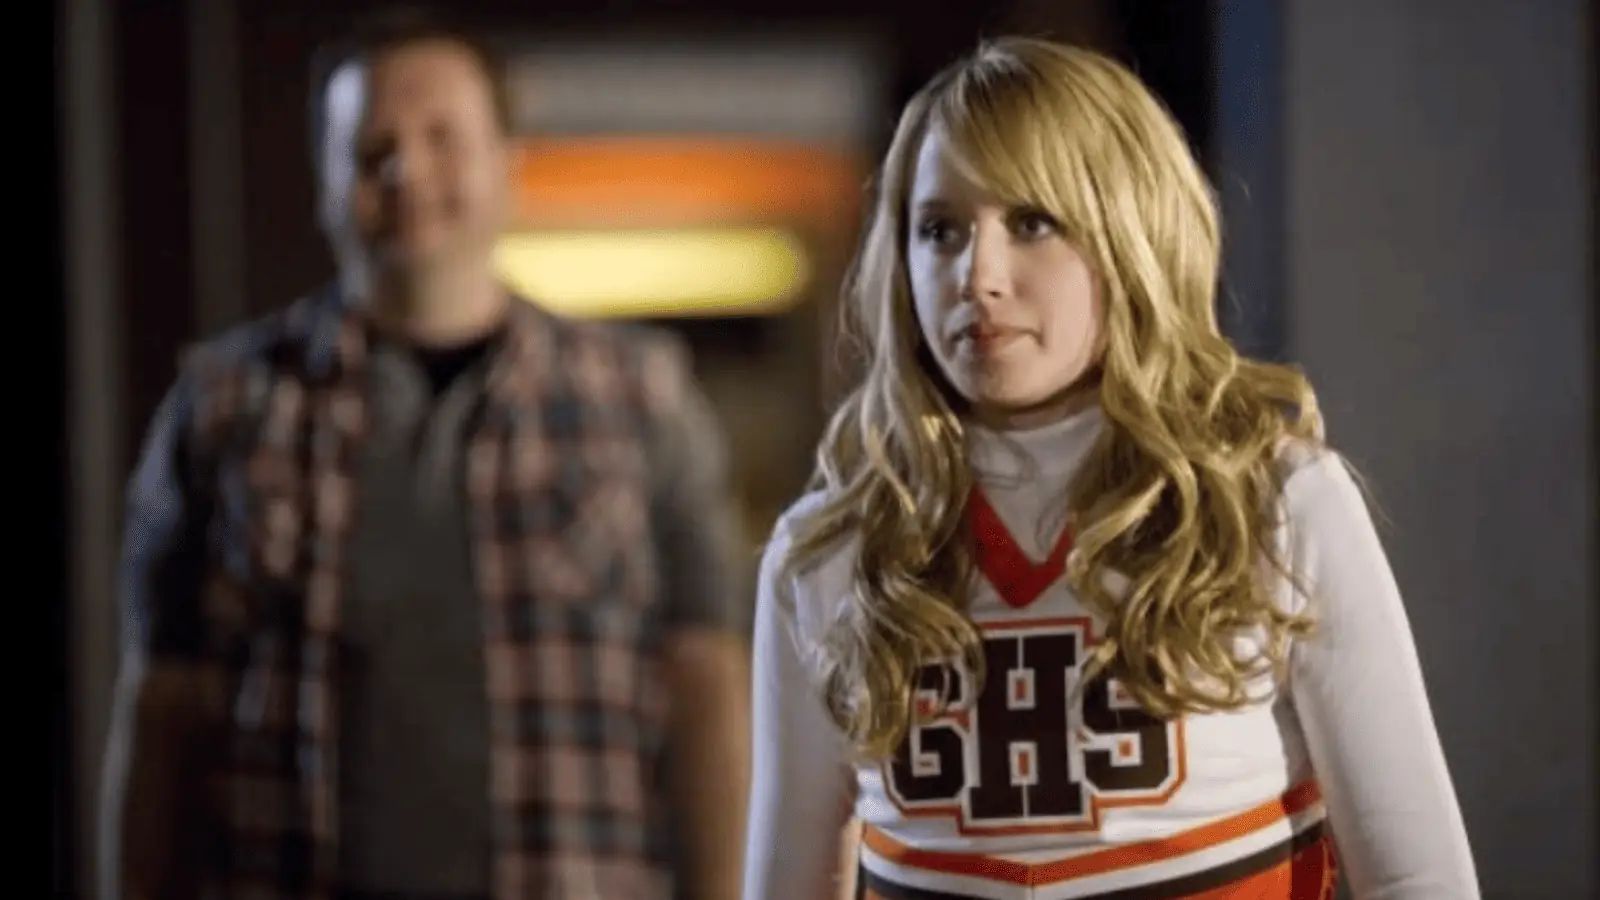 Scene from The Secret Life of the American Teenager